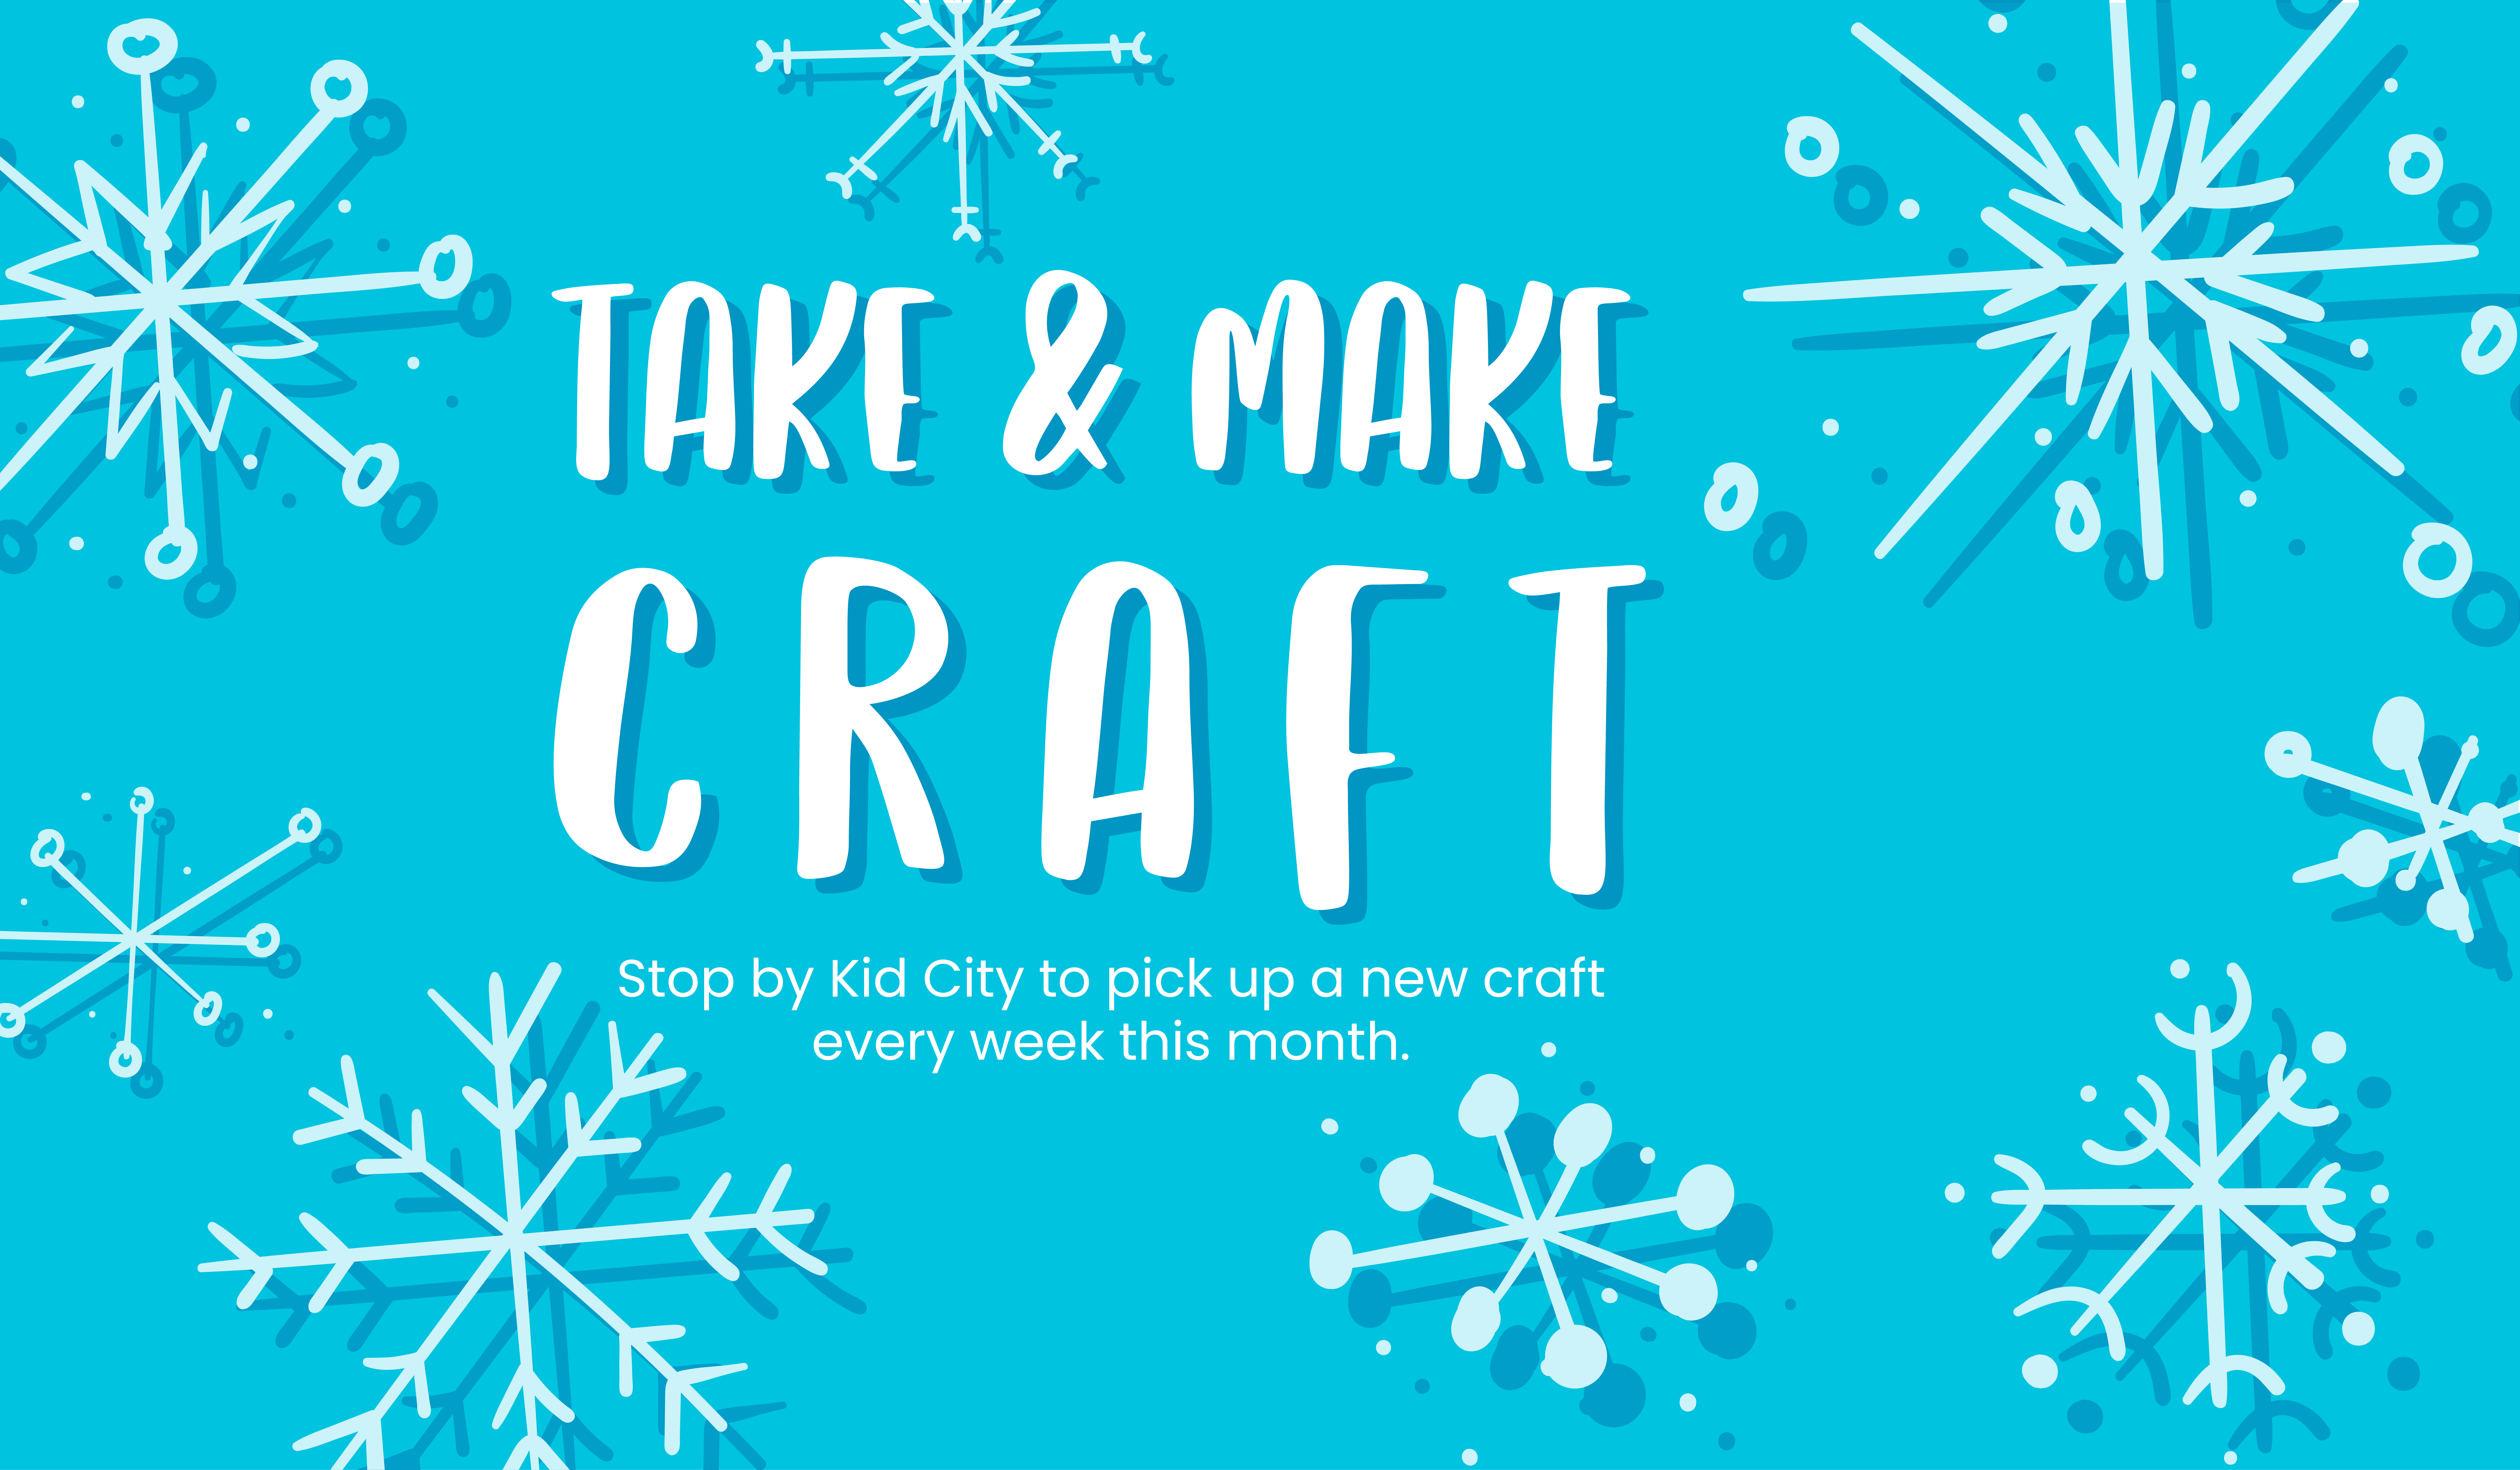 Stop in Kid City for a new craft every week.